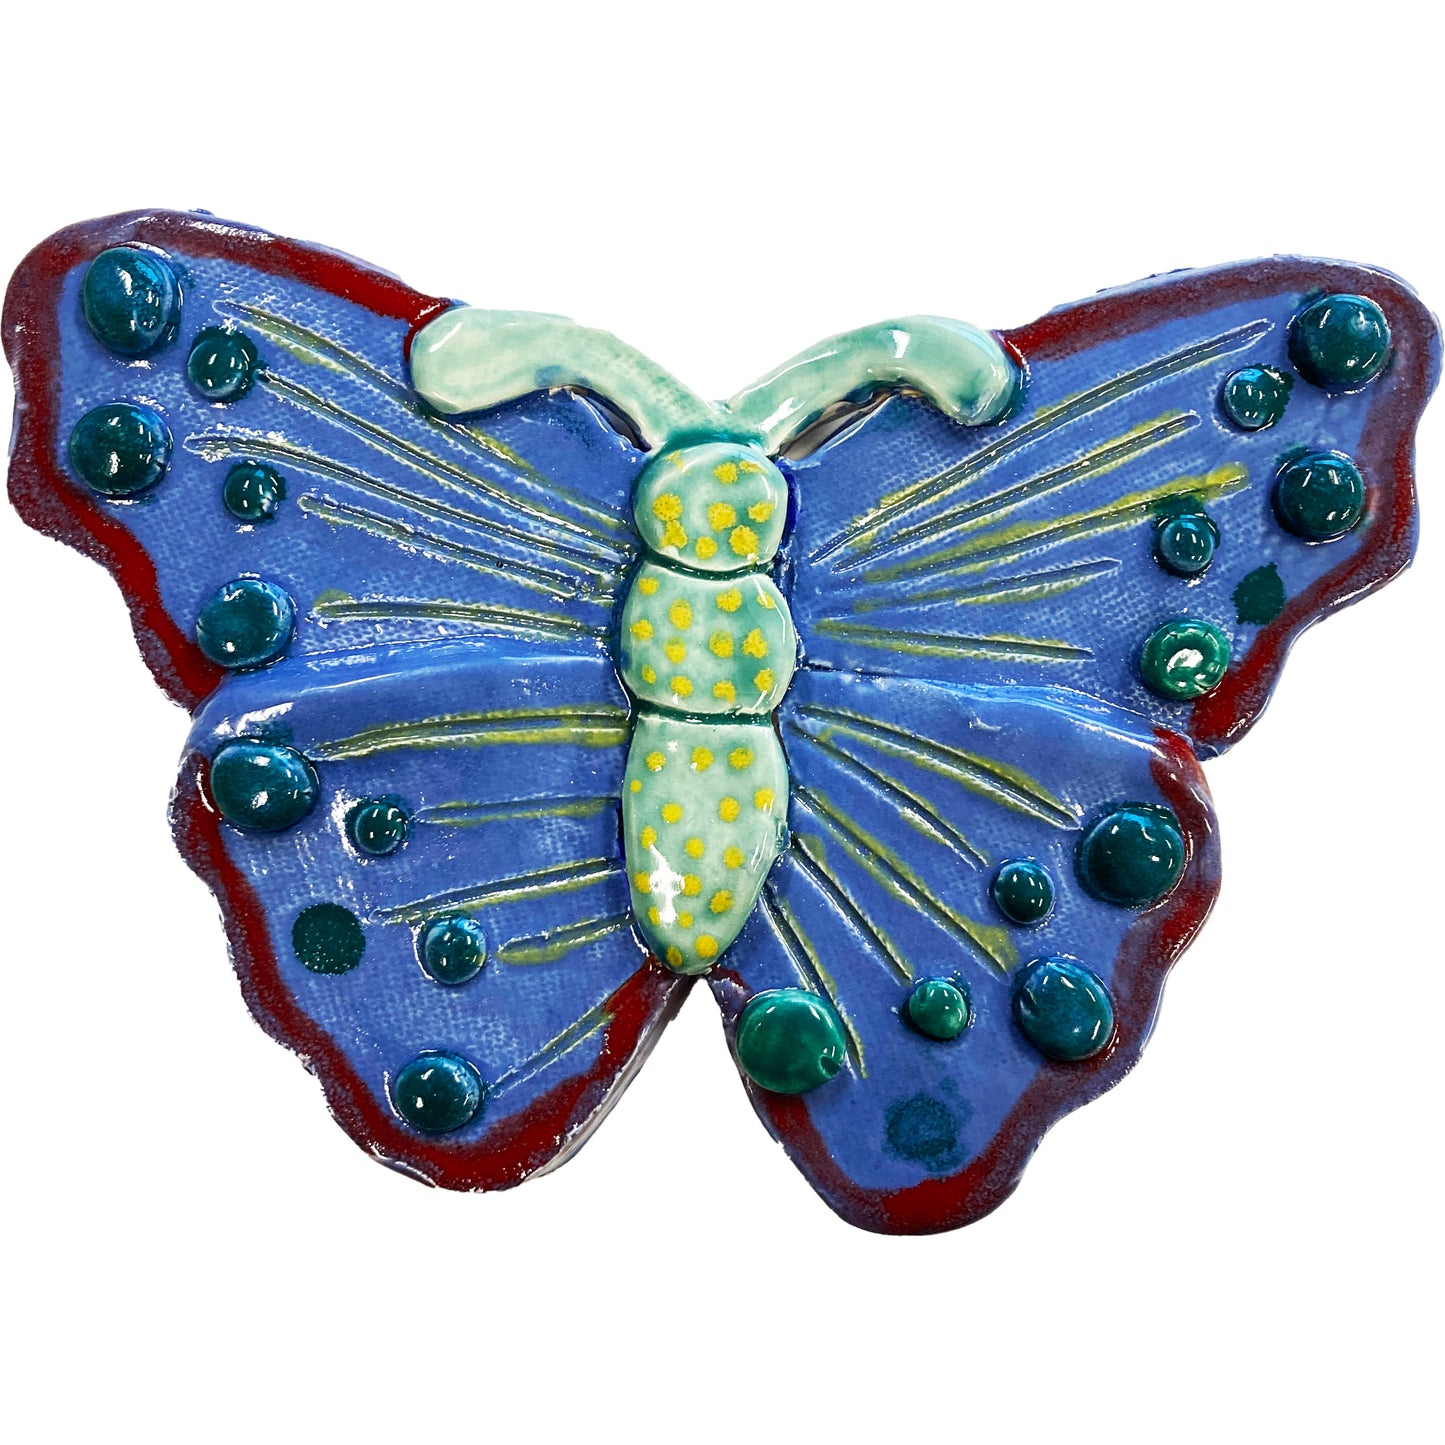 Ceramic Arts Handmade Clay Crafts 8-inch x 5.5-inch Glazed Butterfly made by Lisa Uptain